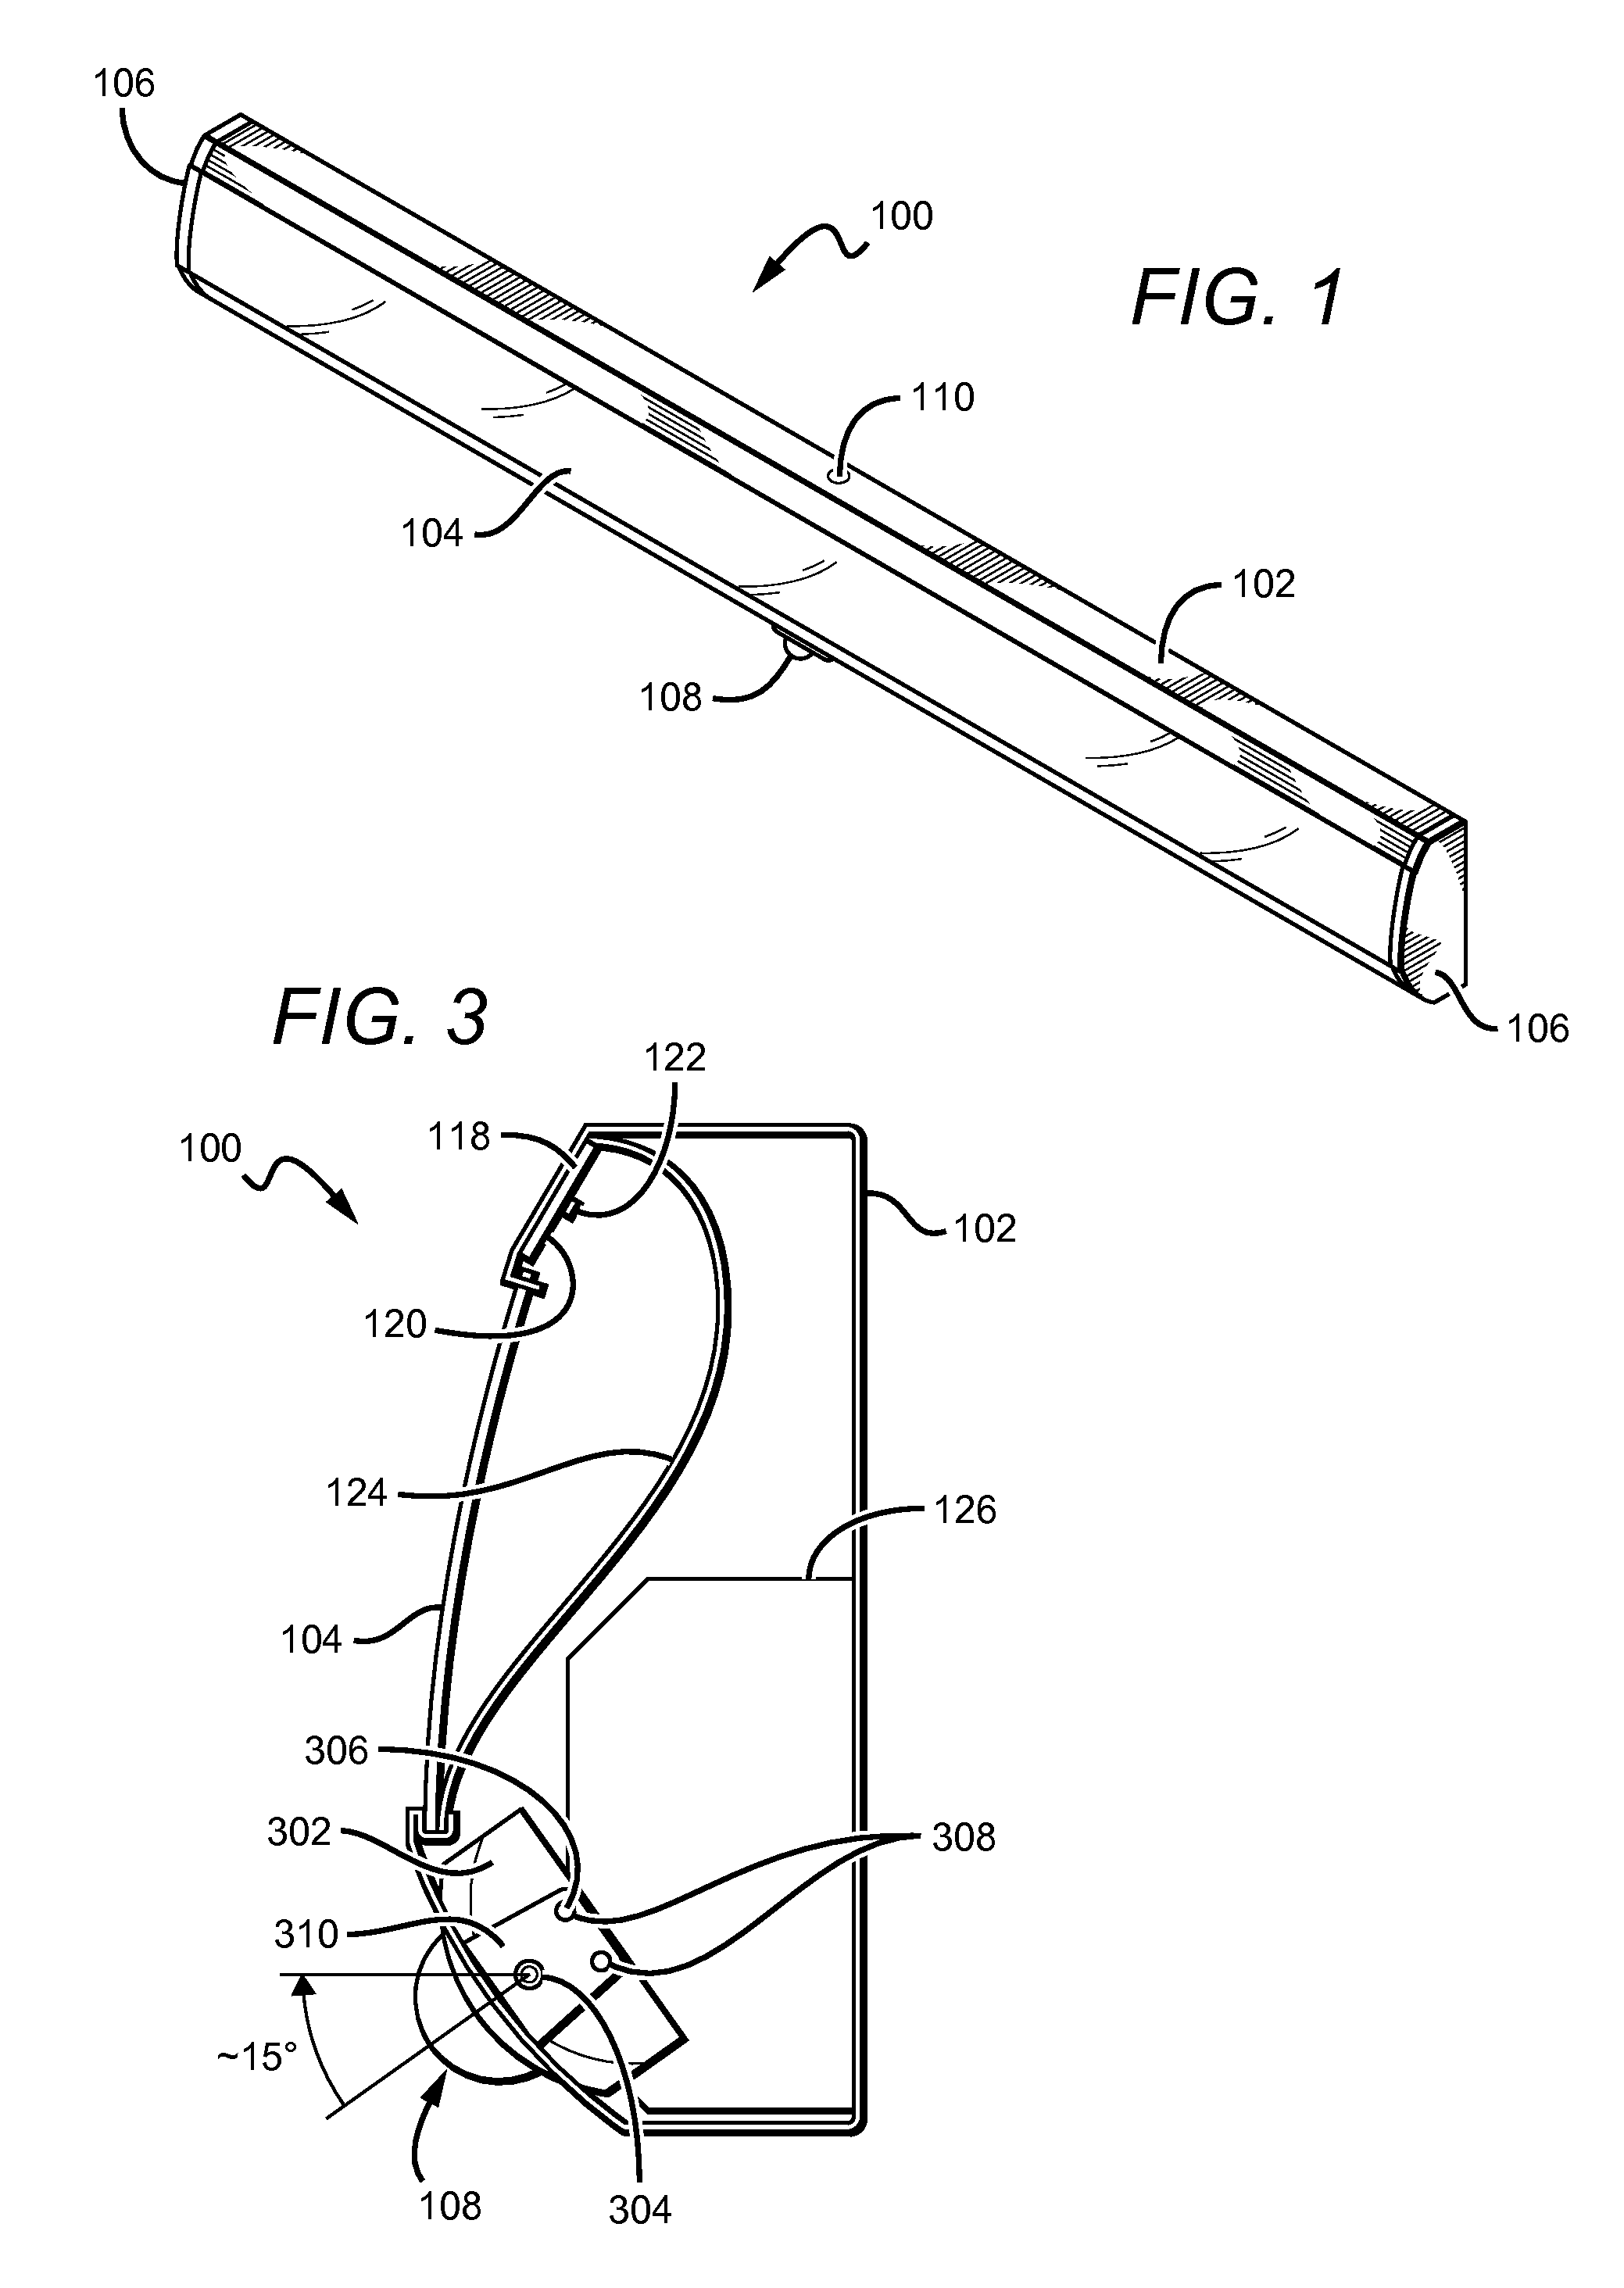 Linear solid state lighting fixture with asymmetric distribution